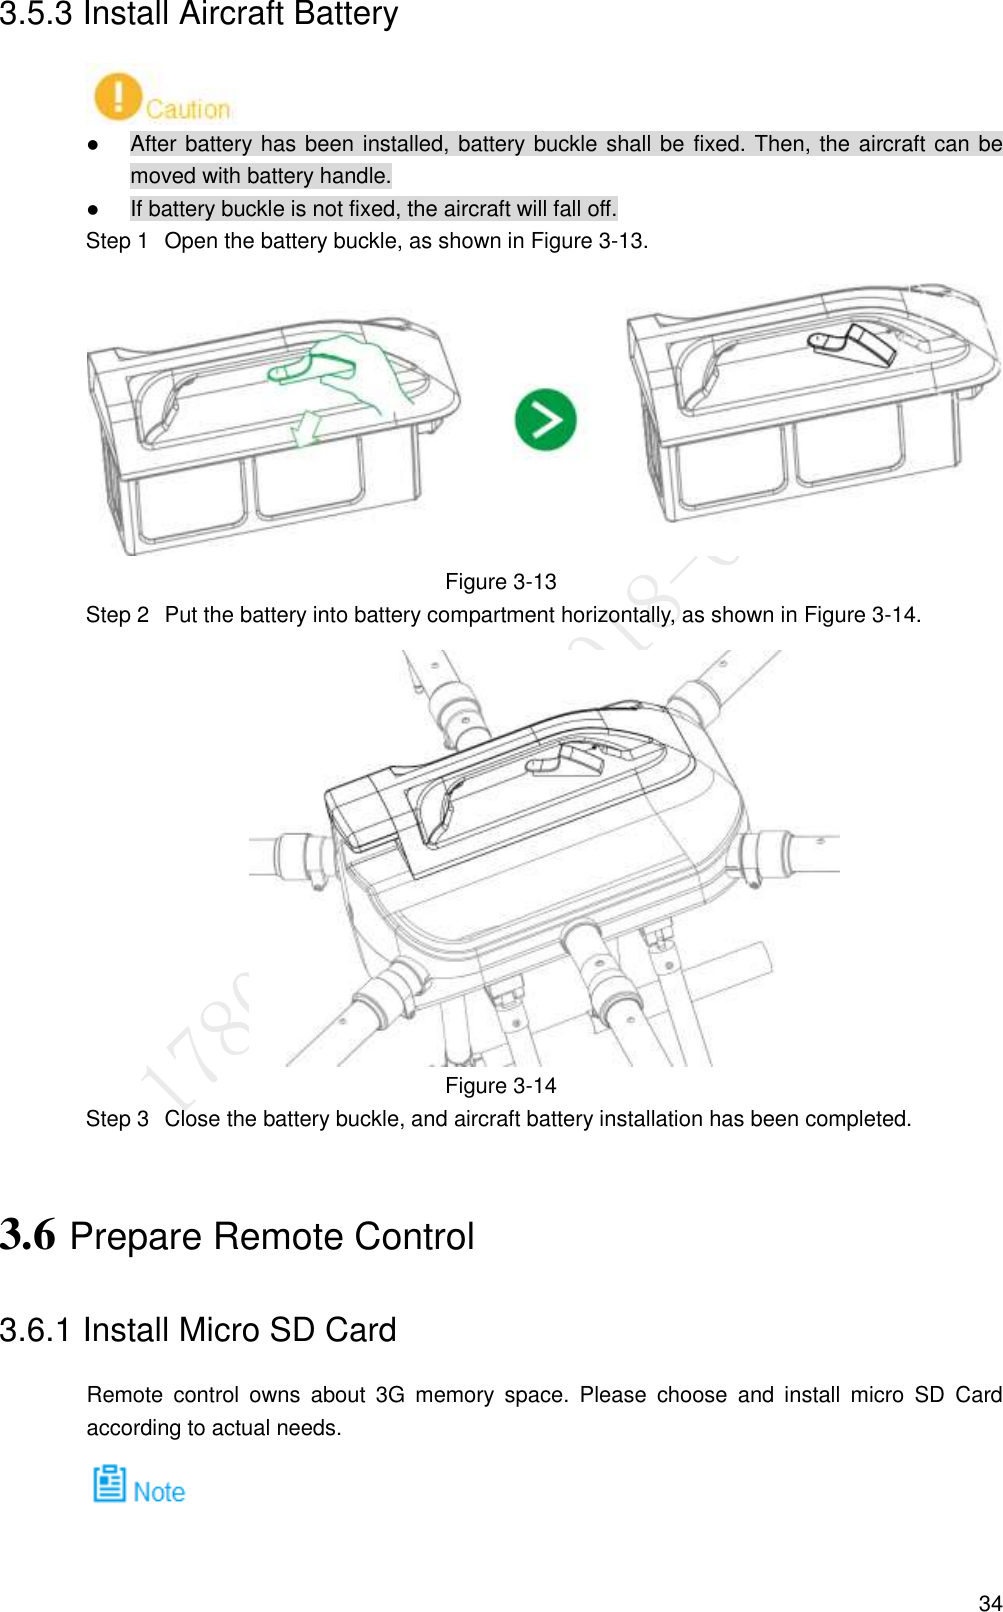  34 3.5.3 Install Aircraft Battery   After battery has been installed, battery buckle shall be fixed. Then, the aircraft can be moved with battery handle.  If battery buckle is not fixed, the aircraft will fall off.   Open the battery buckle, as shown in Figure 3-13. Step 1 Figure 3-13   Put the battery into battery compartment horizontally, as shown in Figure 3-14. Step 2 Figure 3-14   Close the battery buckle, and aircraft battery installation has been completed. Step 33.6 Prepare Remote Control 3.6.1 Install Micro SD Card Remote  control  owns  about  3G  memory  space.  Please  choose  and  install  micro  SD  Card according to actual needs.  